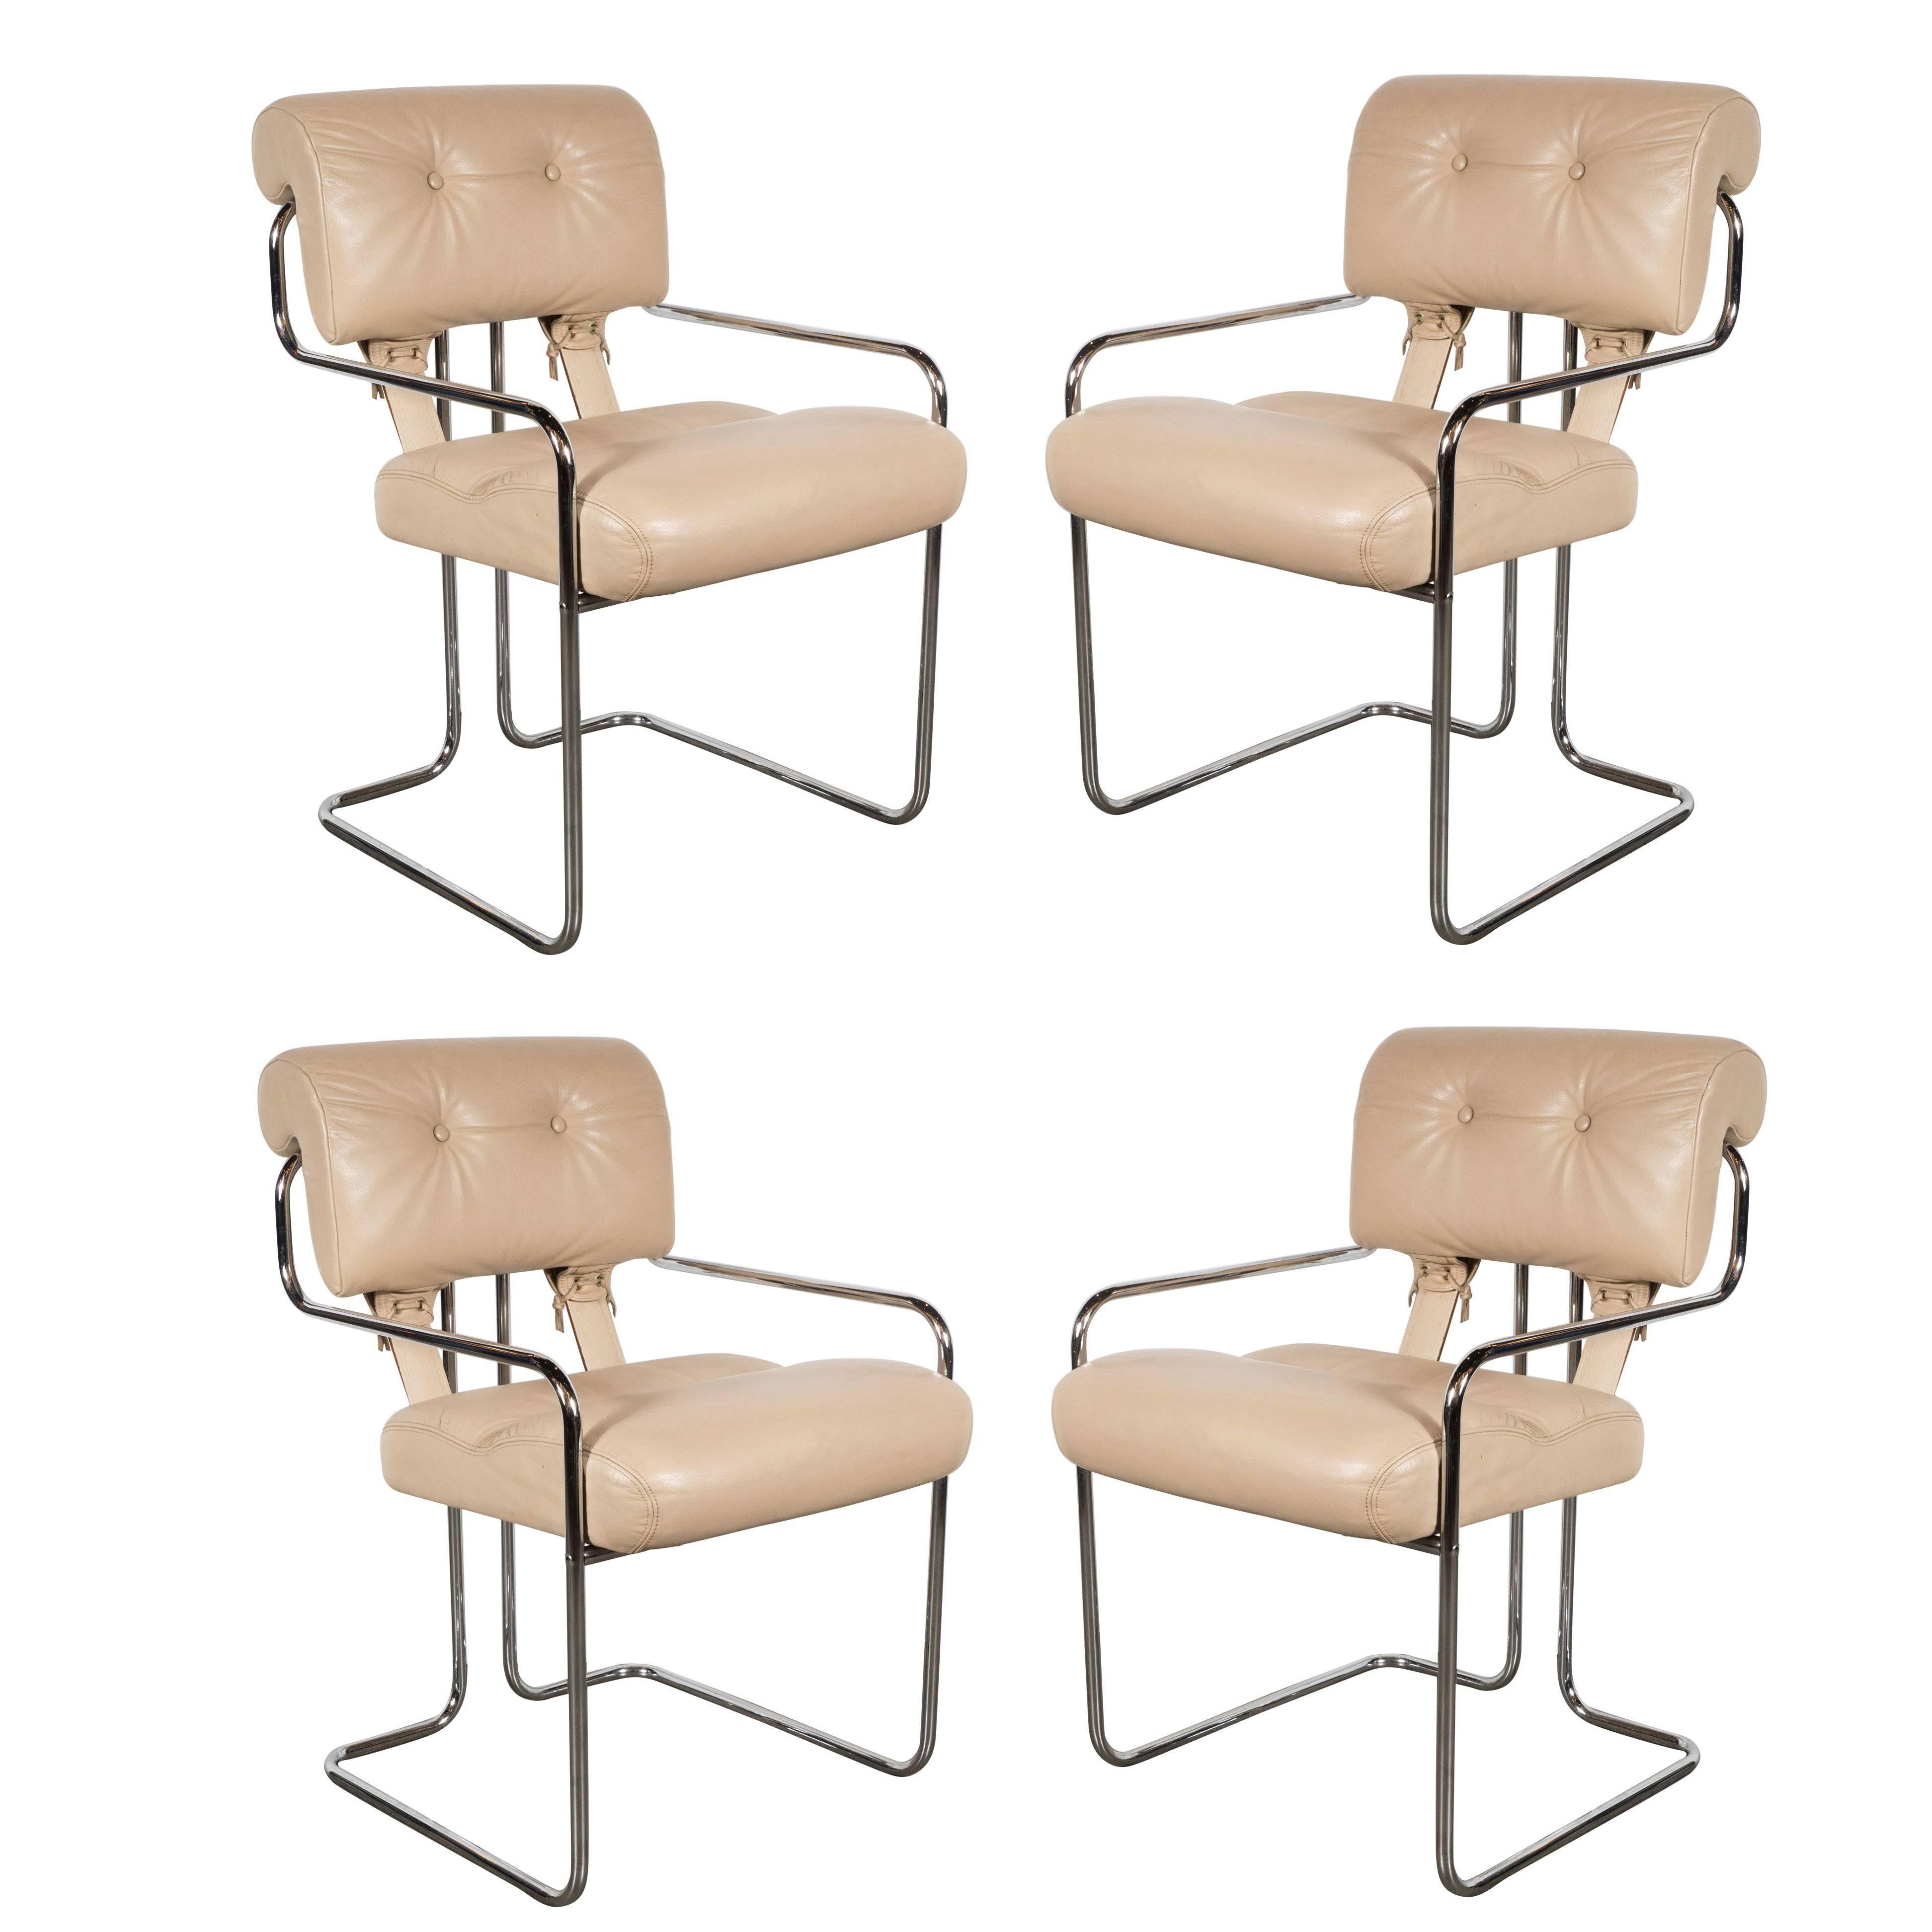 Set of Four Tucroma Chairs by Guido Faleschini for Mariani by Pace in Cream